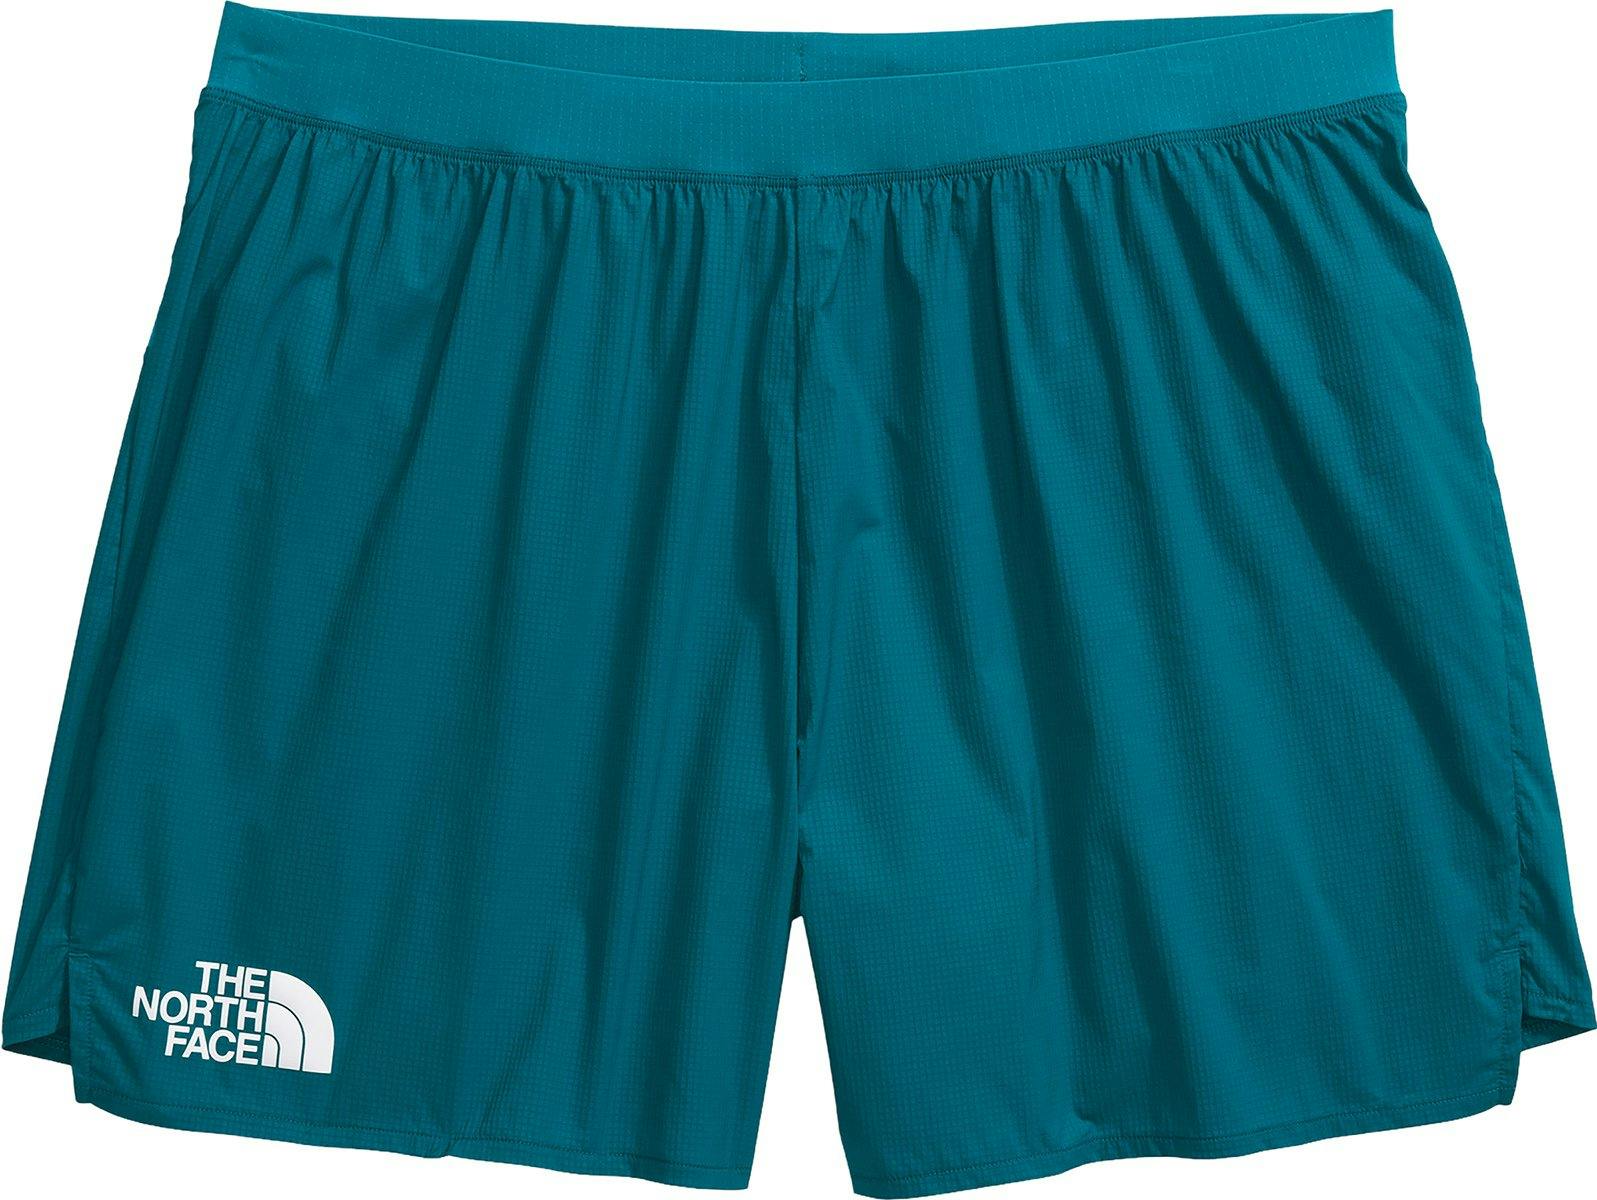 Product image for Summit Series Pacesetter Shorts 5" - Men's